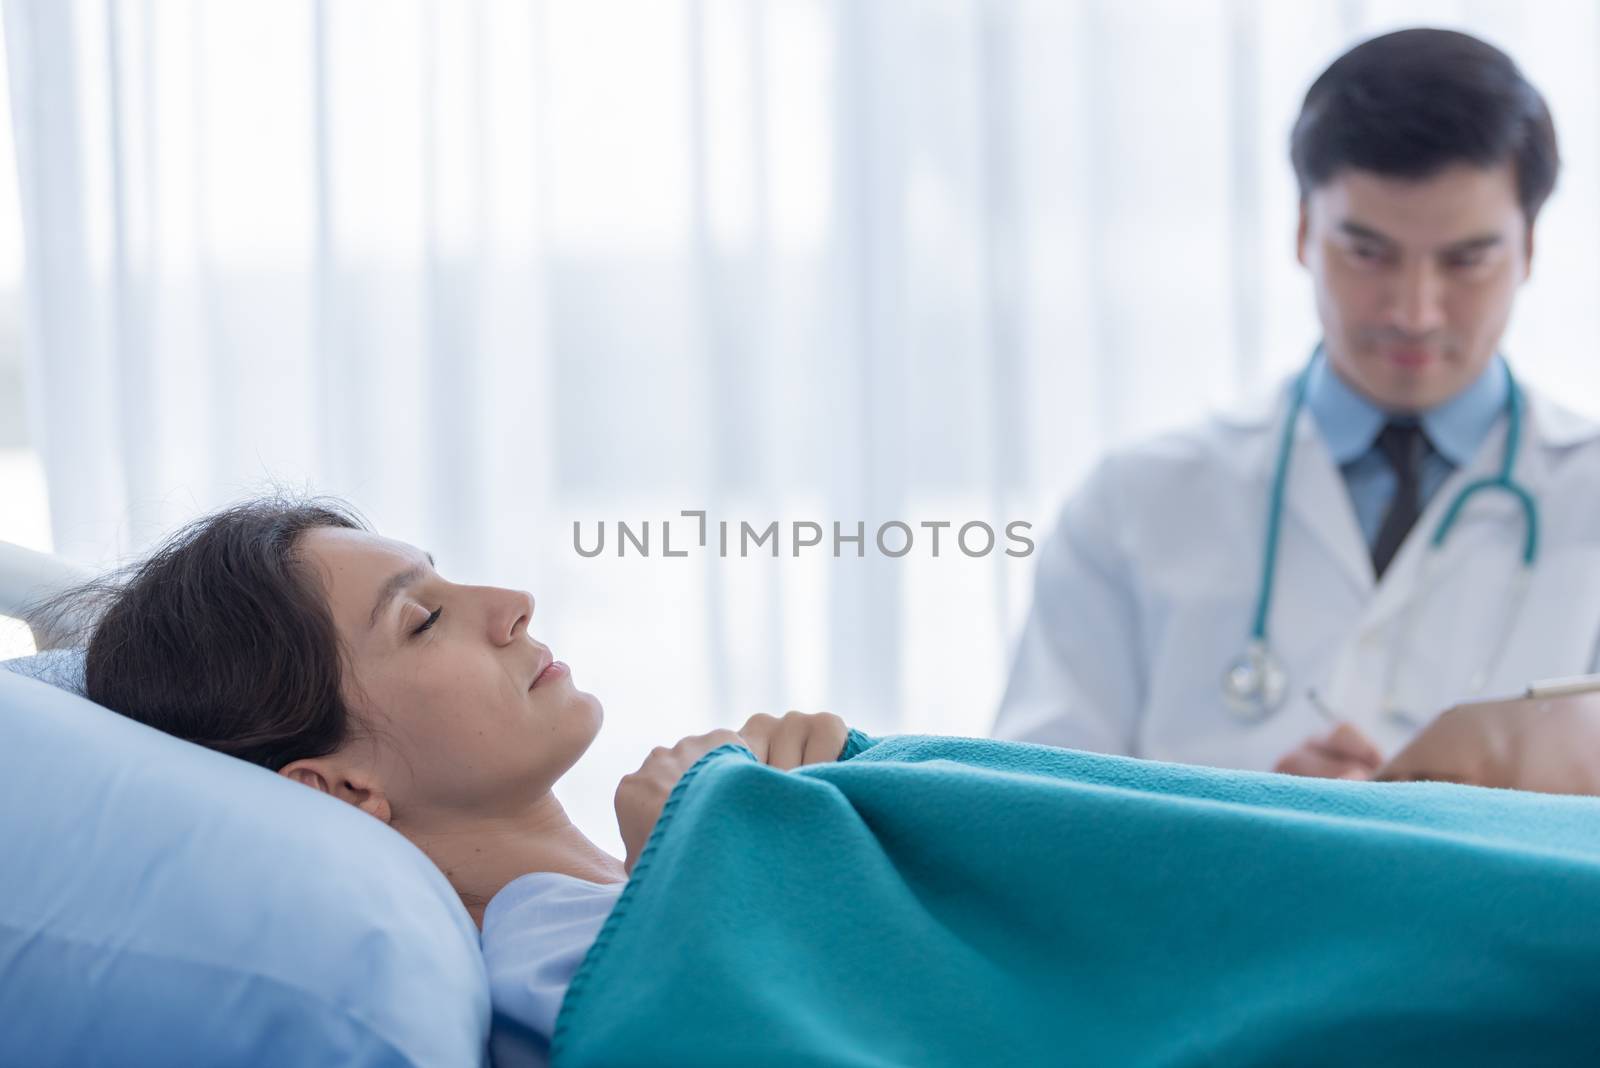 A doctor take care of sick patient woman at the hospital or medi by animagesdesign